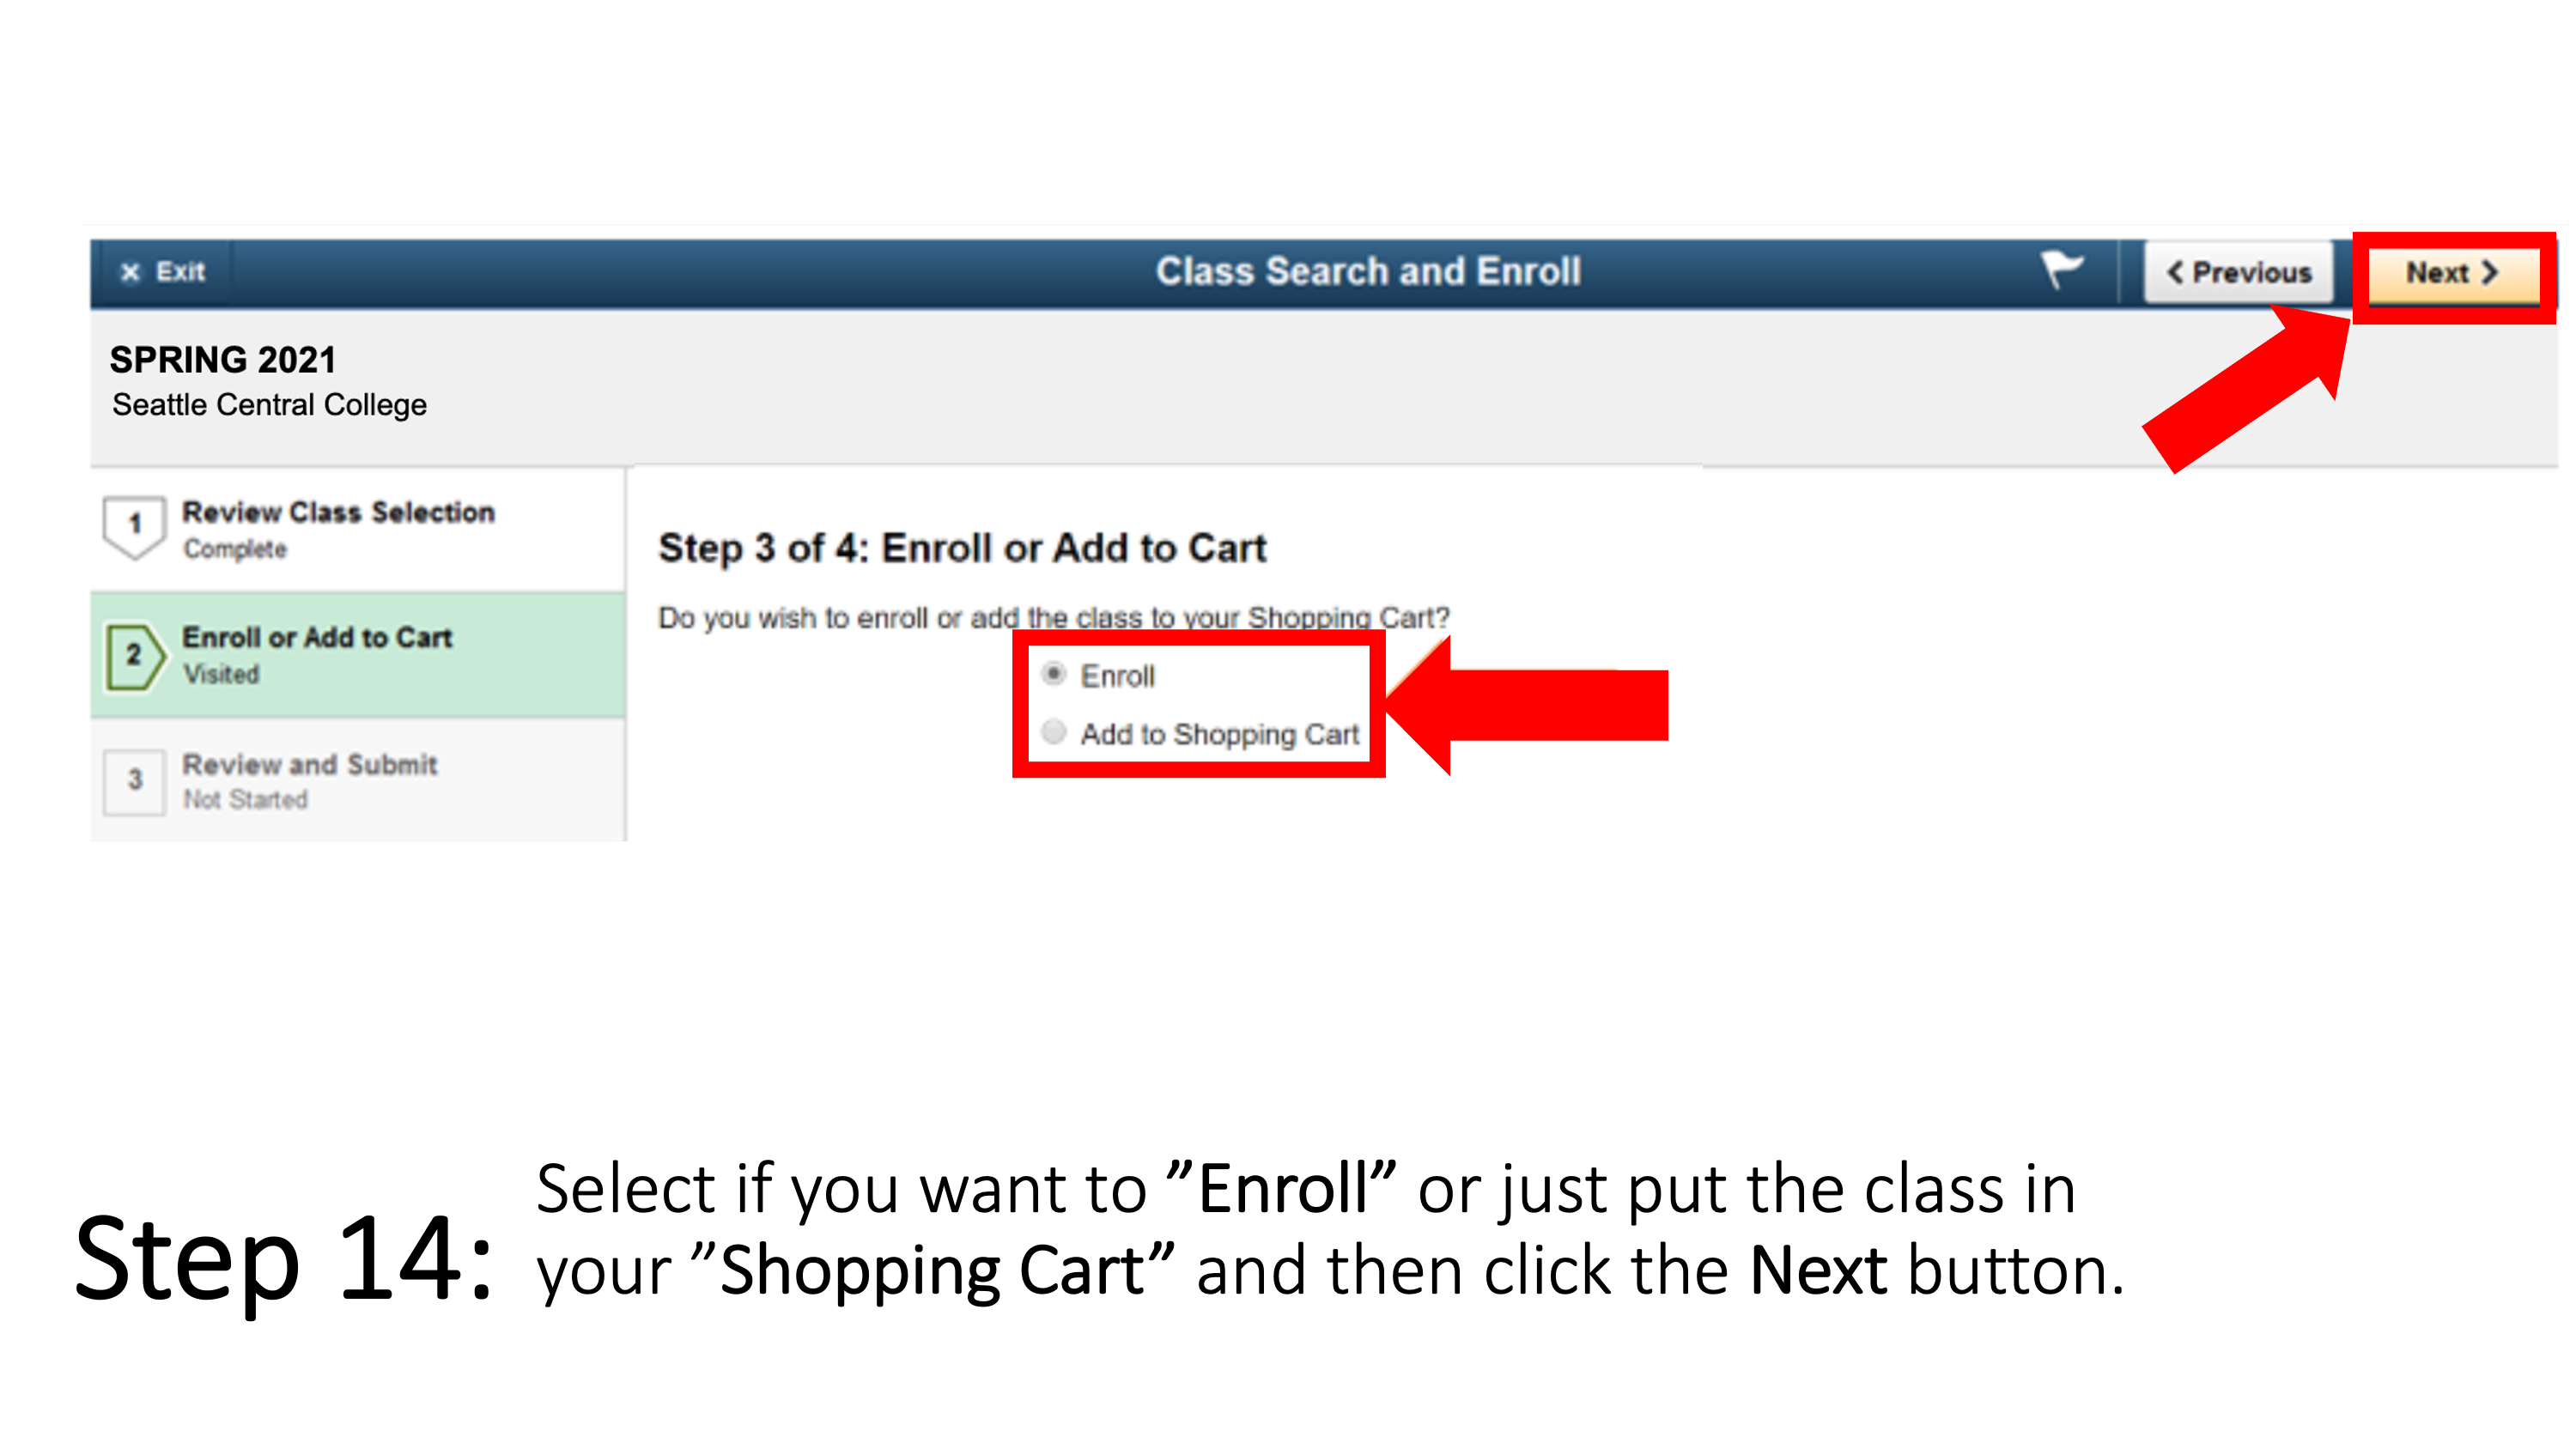 Select if you want to ”Enroll” or just put the class in your ”Shopping Cart” and then click the Next button.